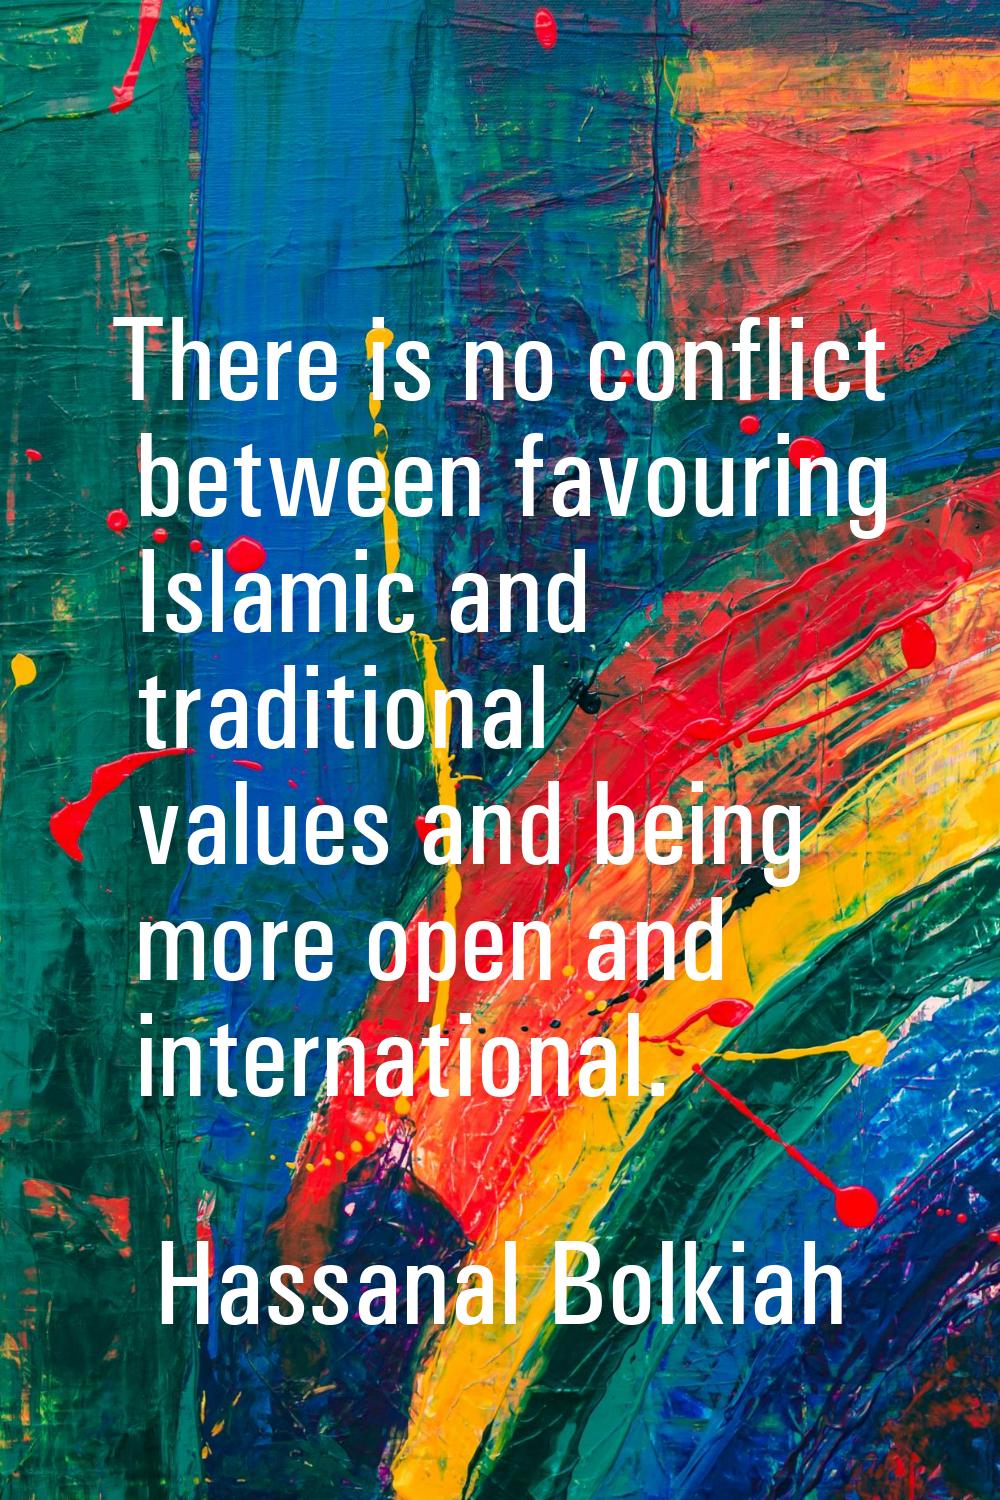 There is no conflict between favouring Islamic and traditional values and being more open and inter